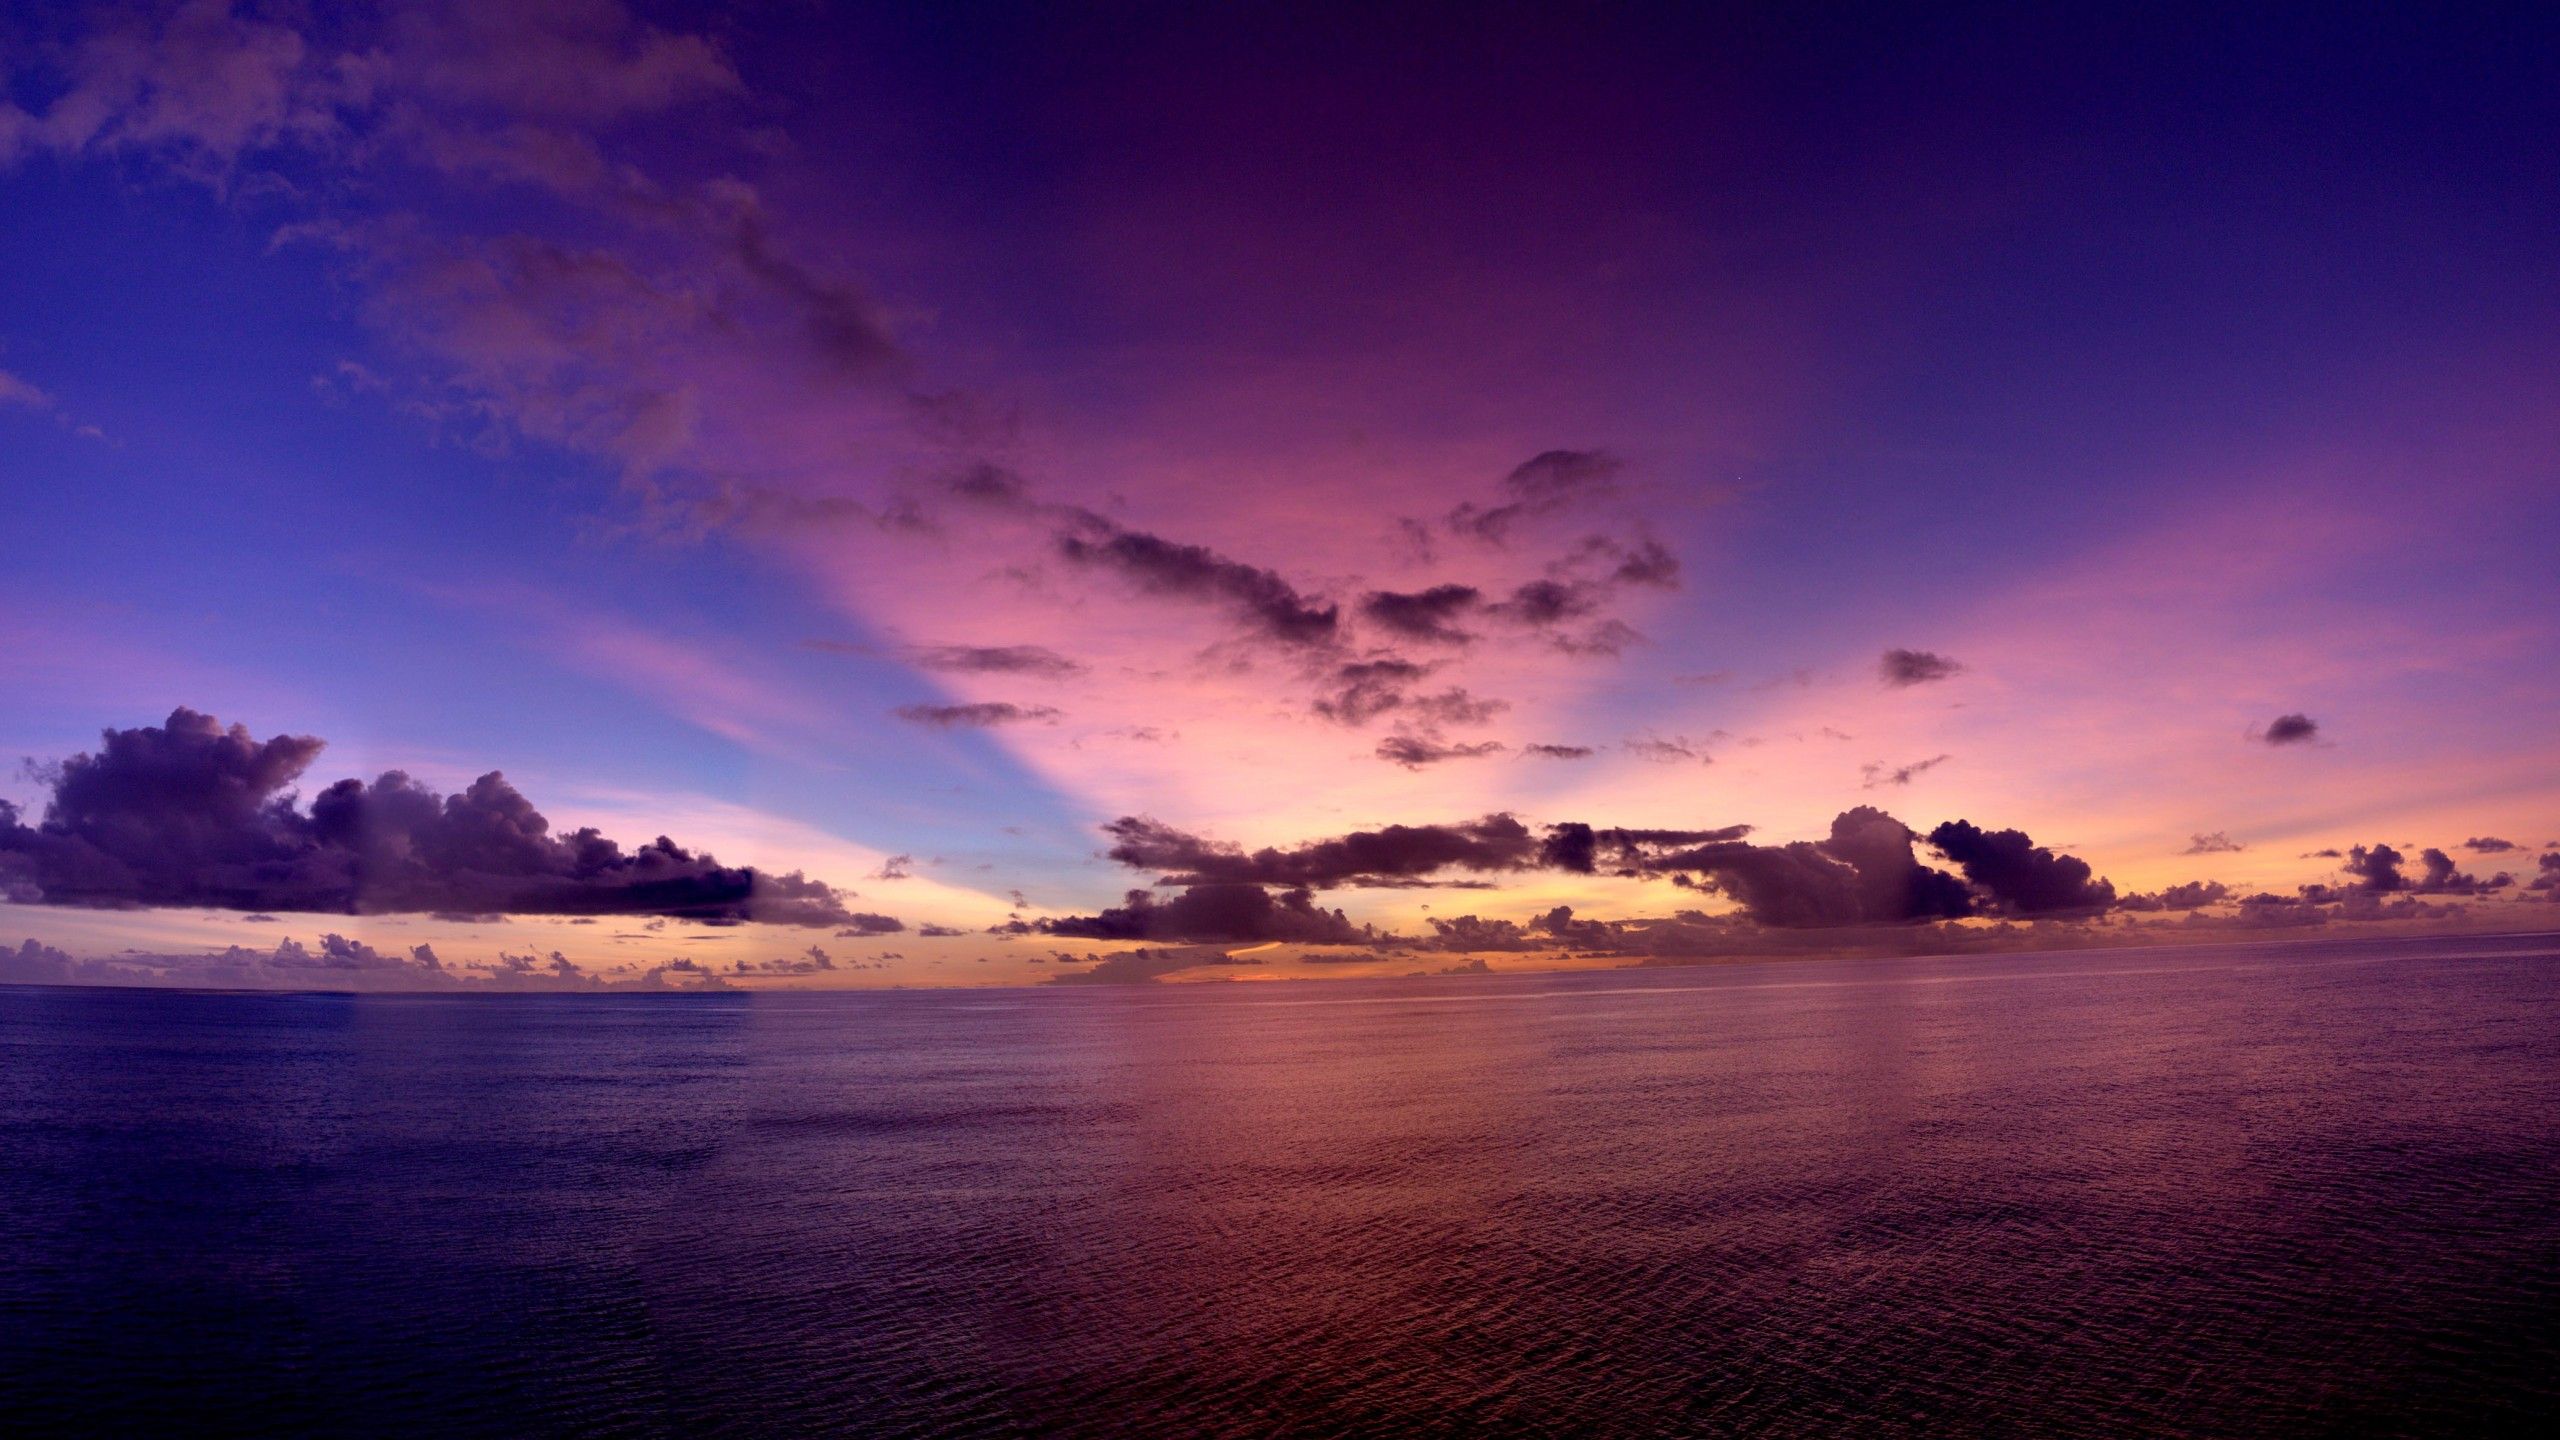 A beautiful sunset over the ocean with a purple and blue sky - Sunset